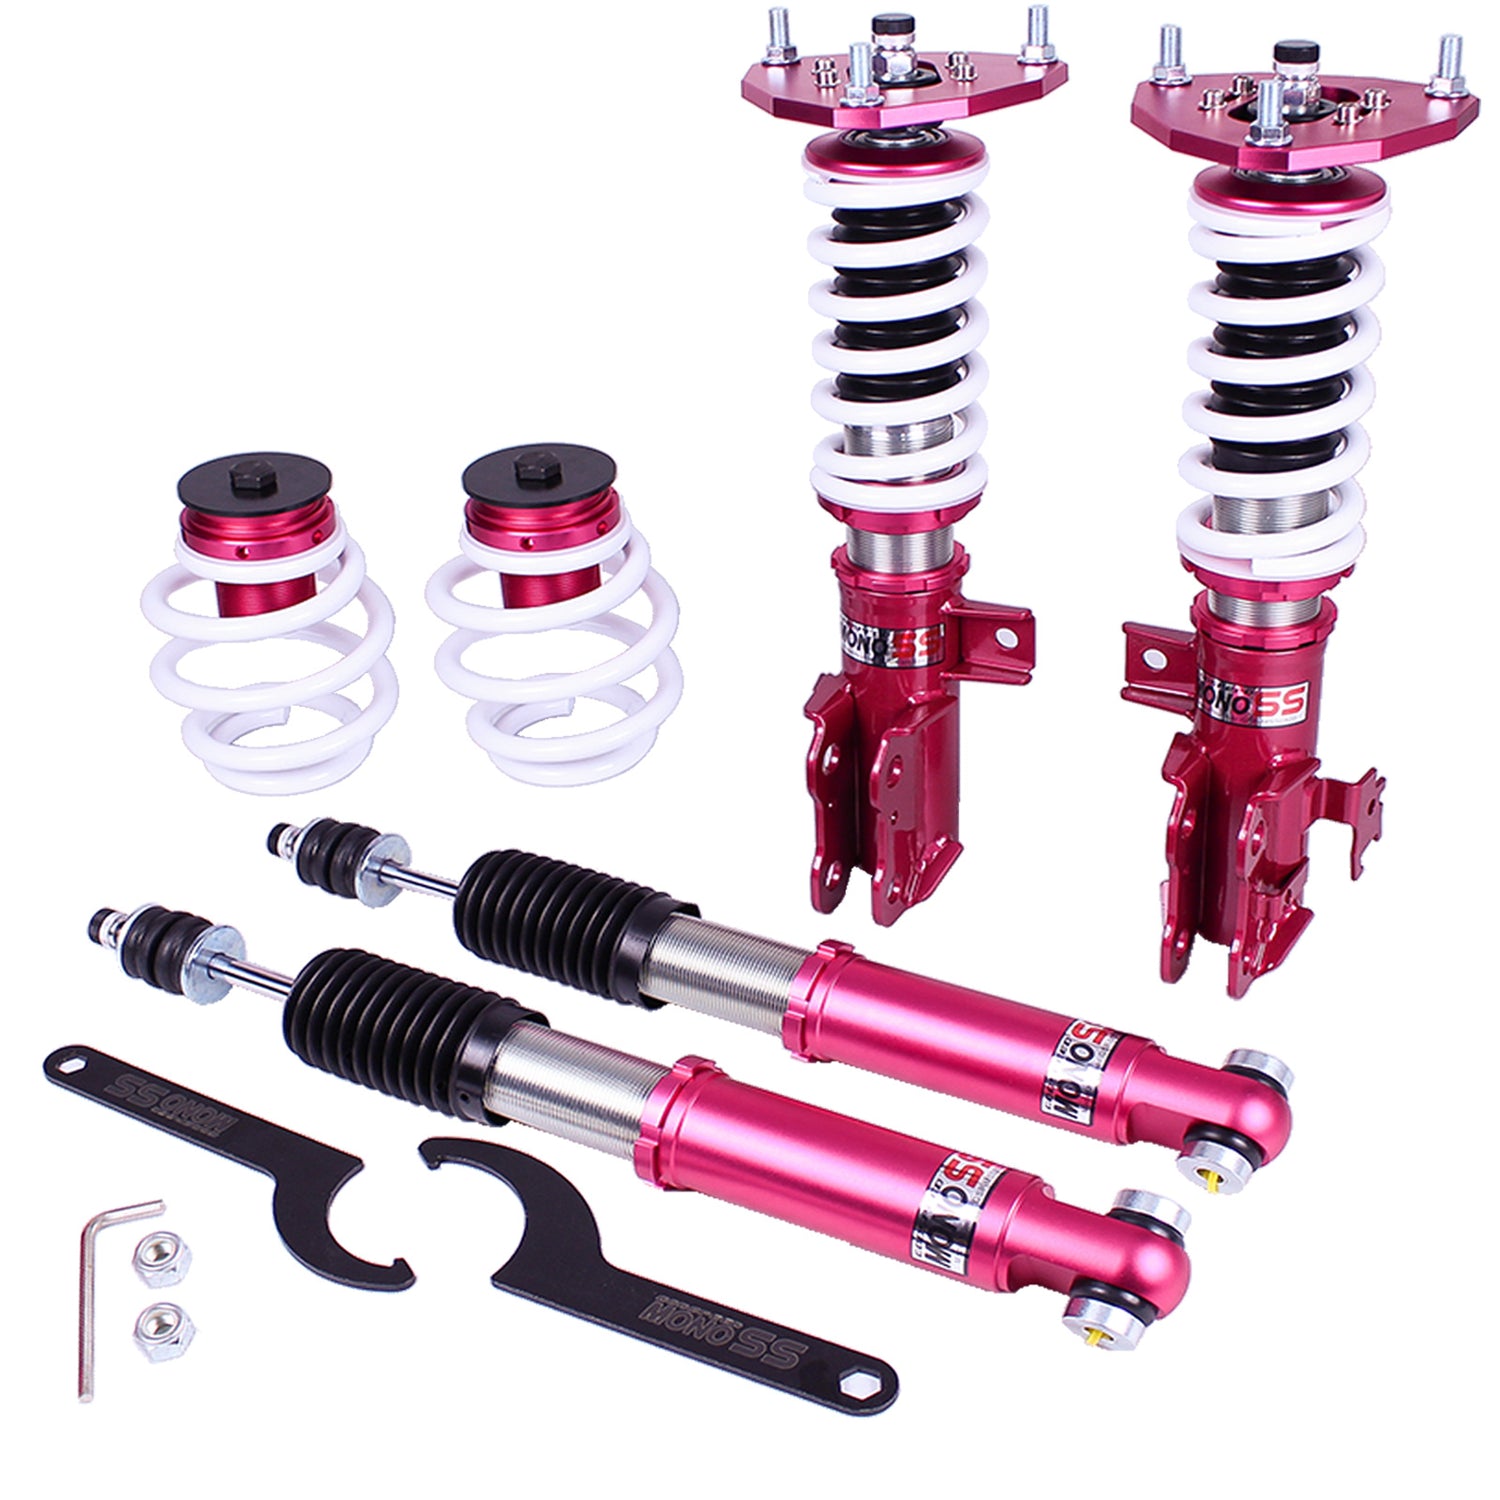 Godspeed MSS0920-A MonoSS Coilover Lowering Kit, Fully Adjustable, Ride Height, Spring Tension And 16 Click Damping, Scion tC(AGT20) 2011-16